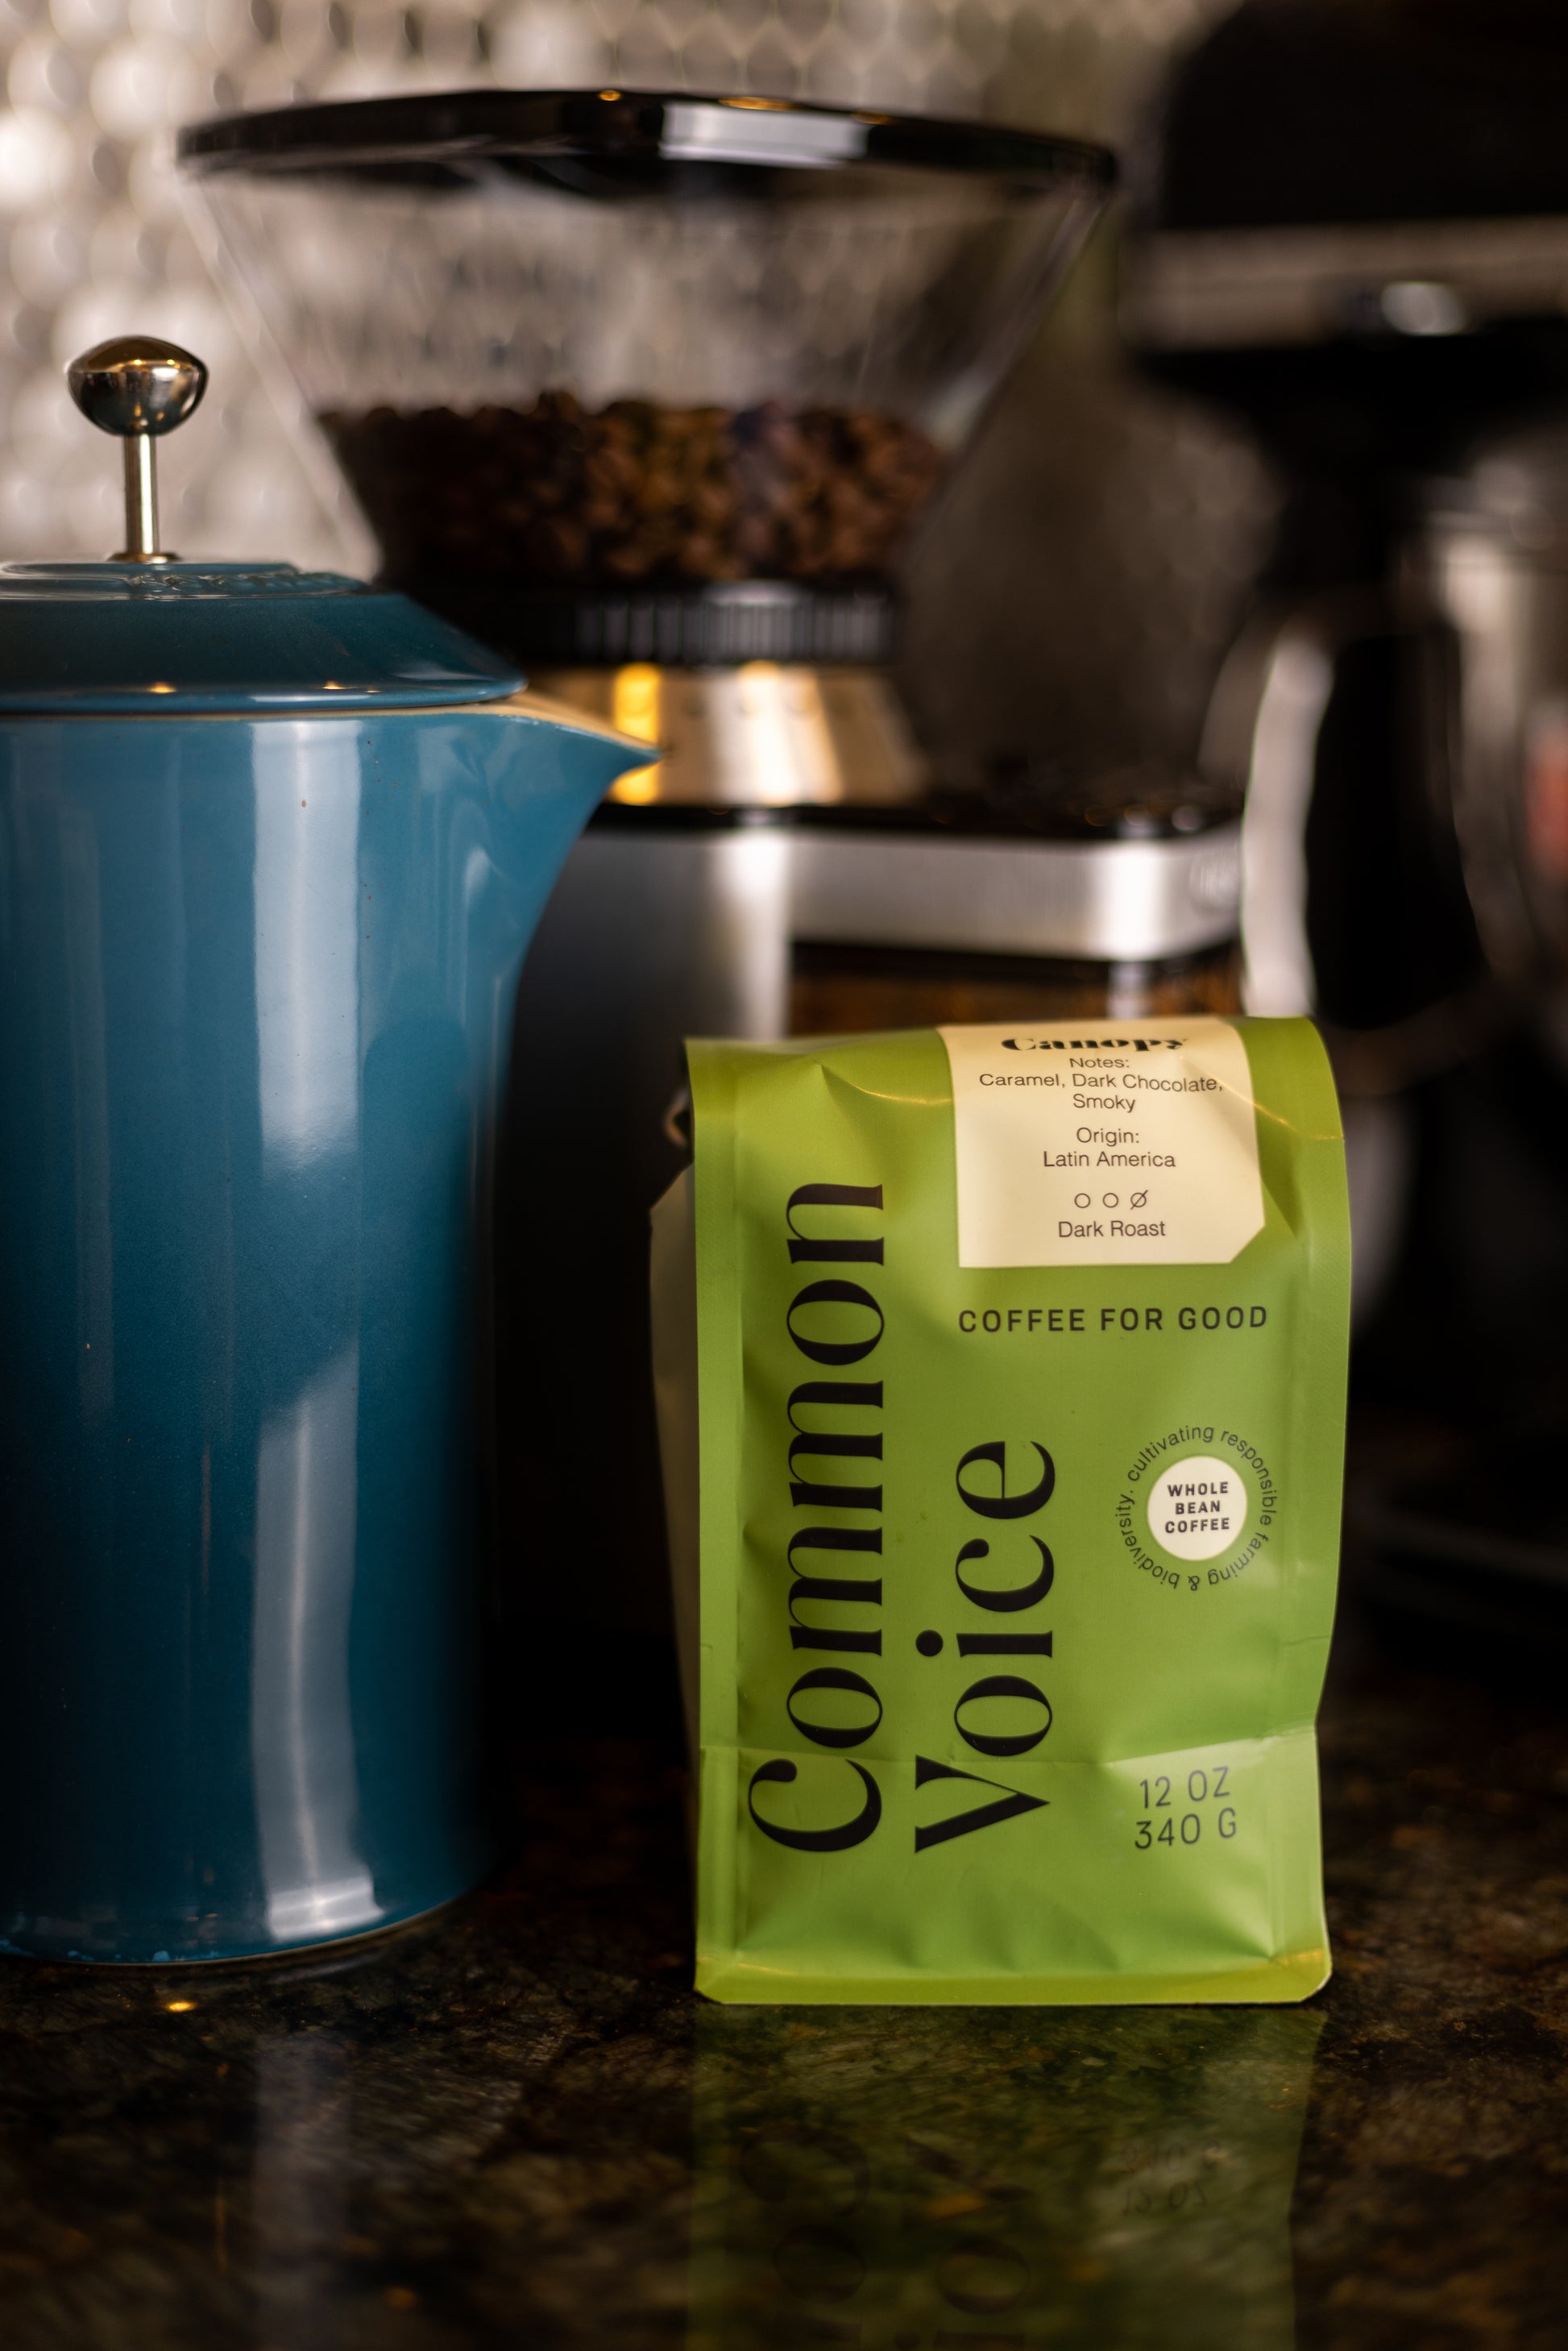 Common Voice Canopy coffee bag next to a coffee grinder and coffee pot